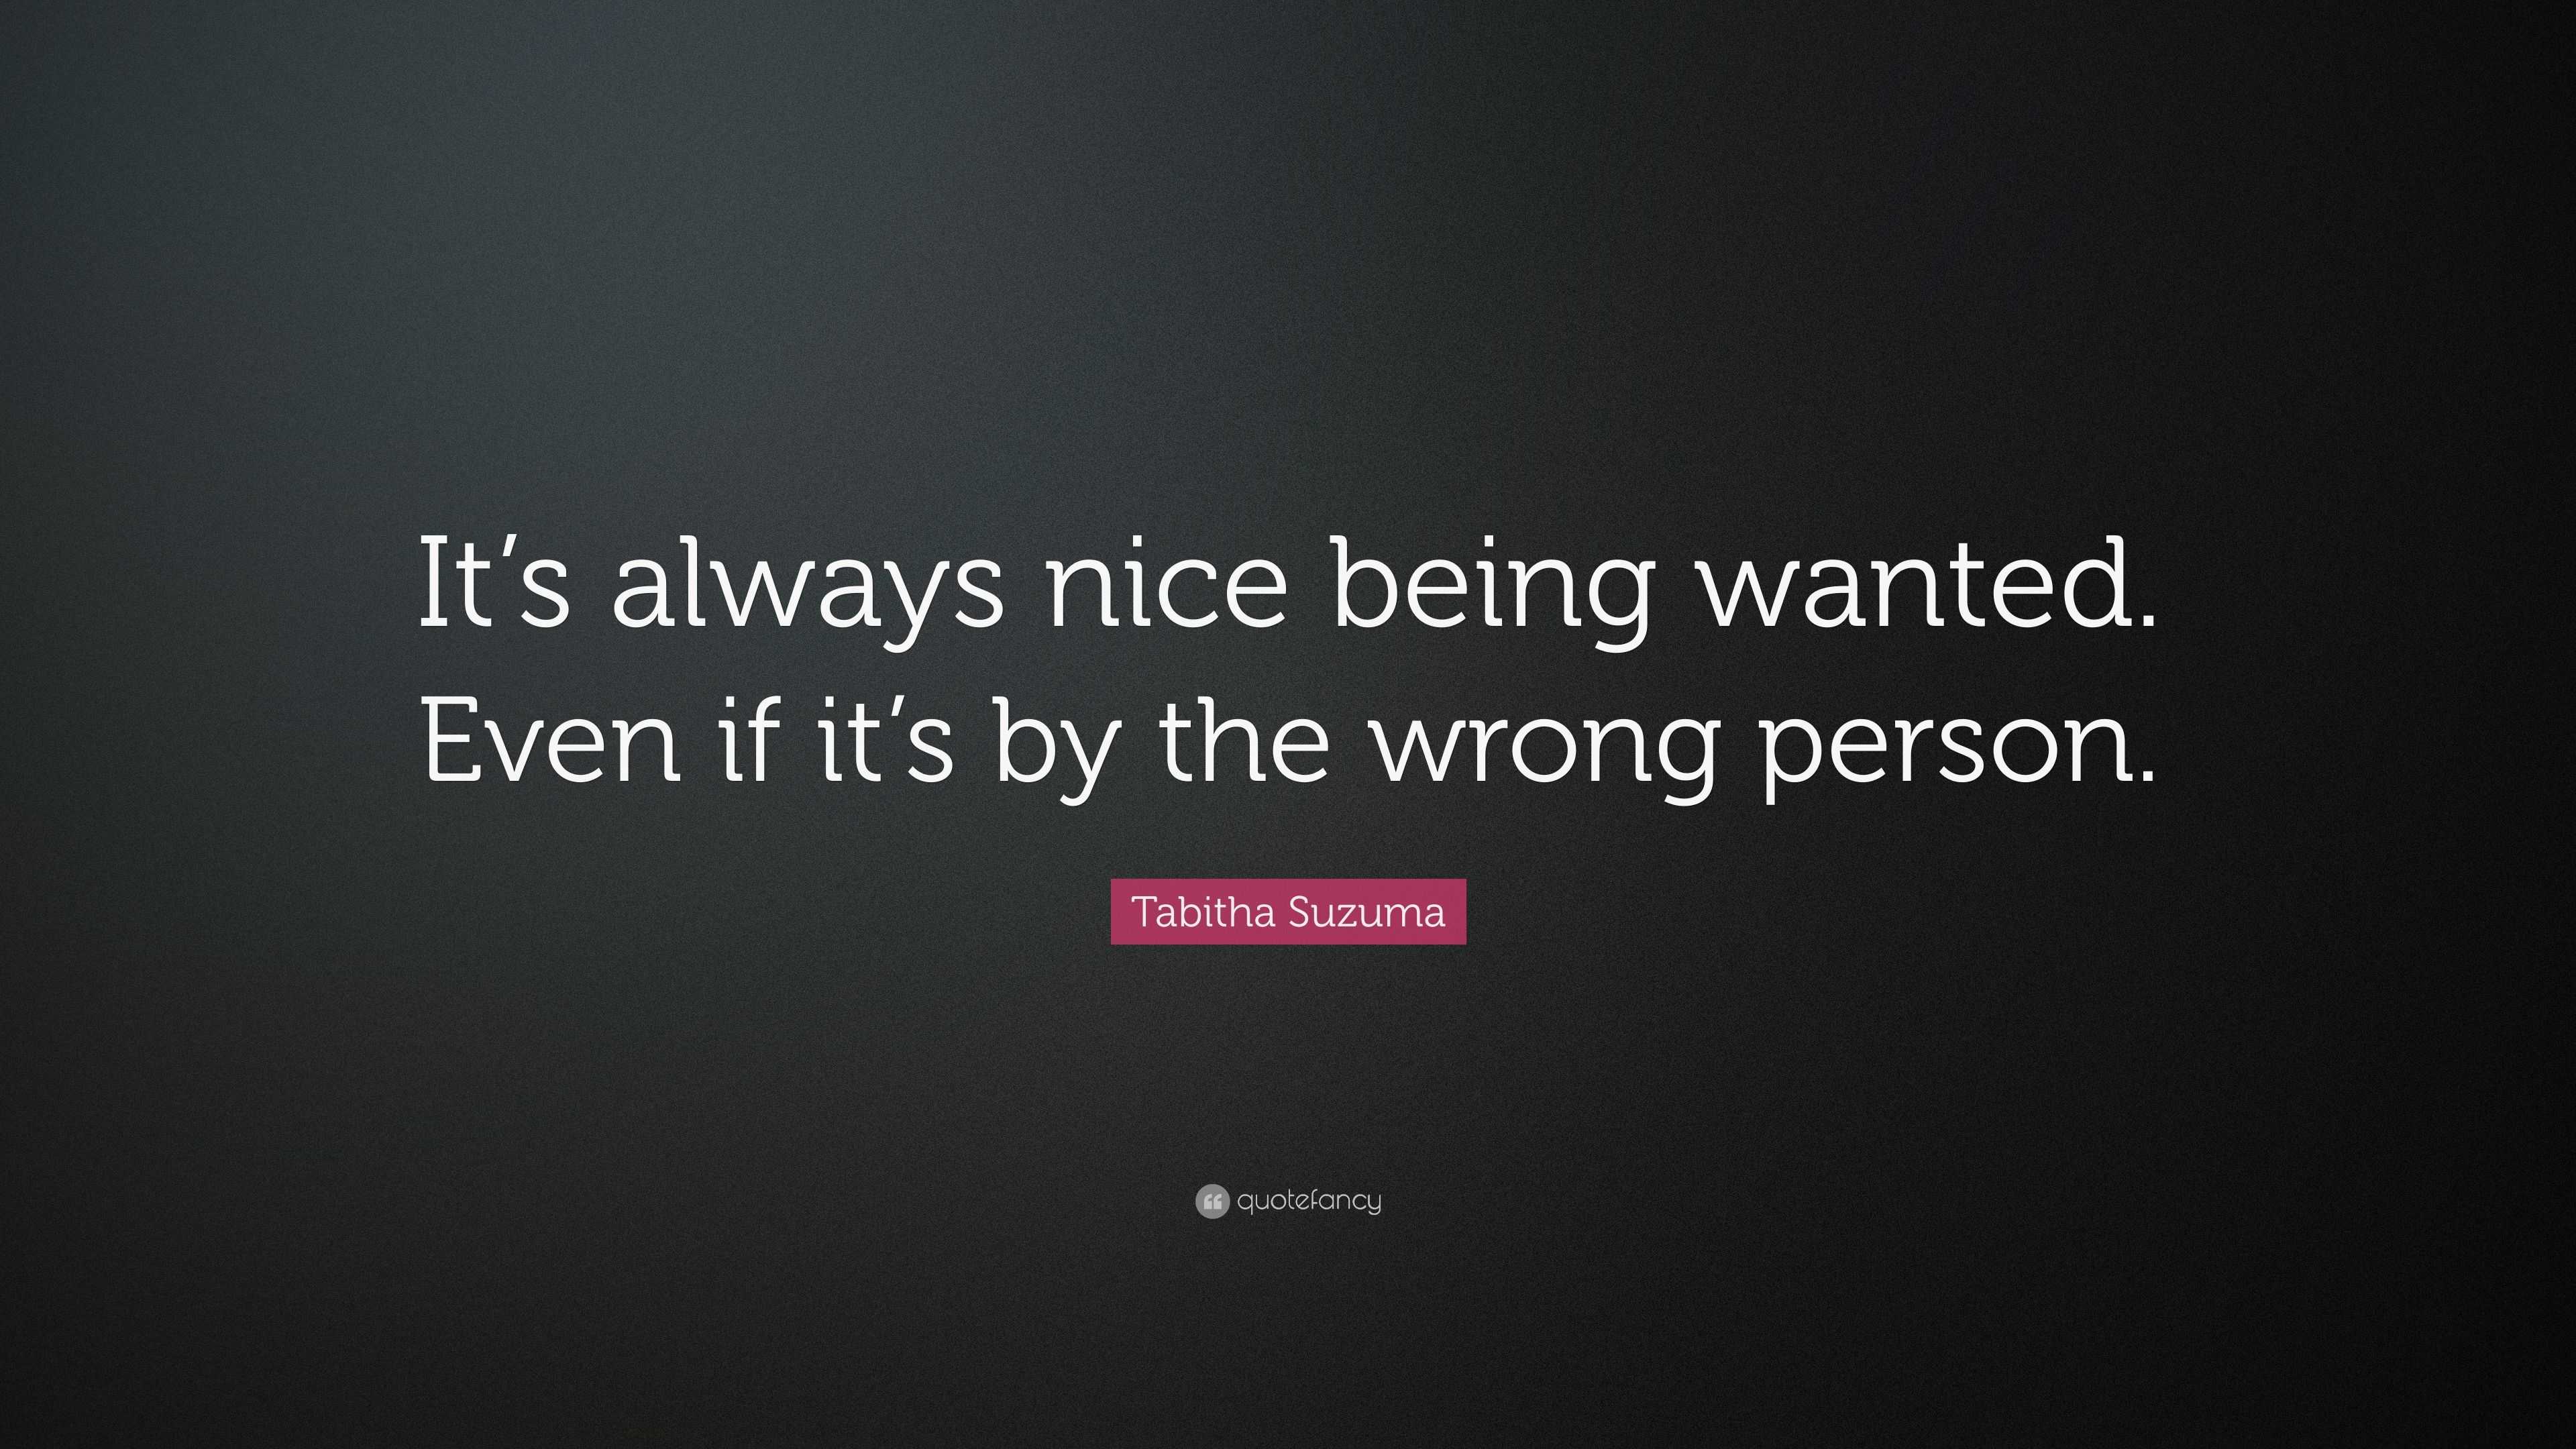 Tabitha Suzuma Quote: “It’s always nice being wanted. Even if it’s by ...